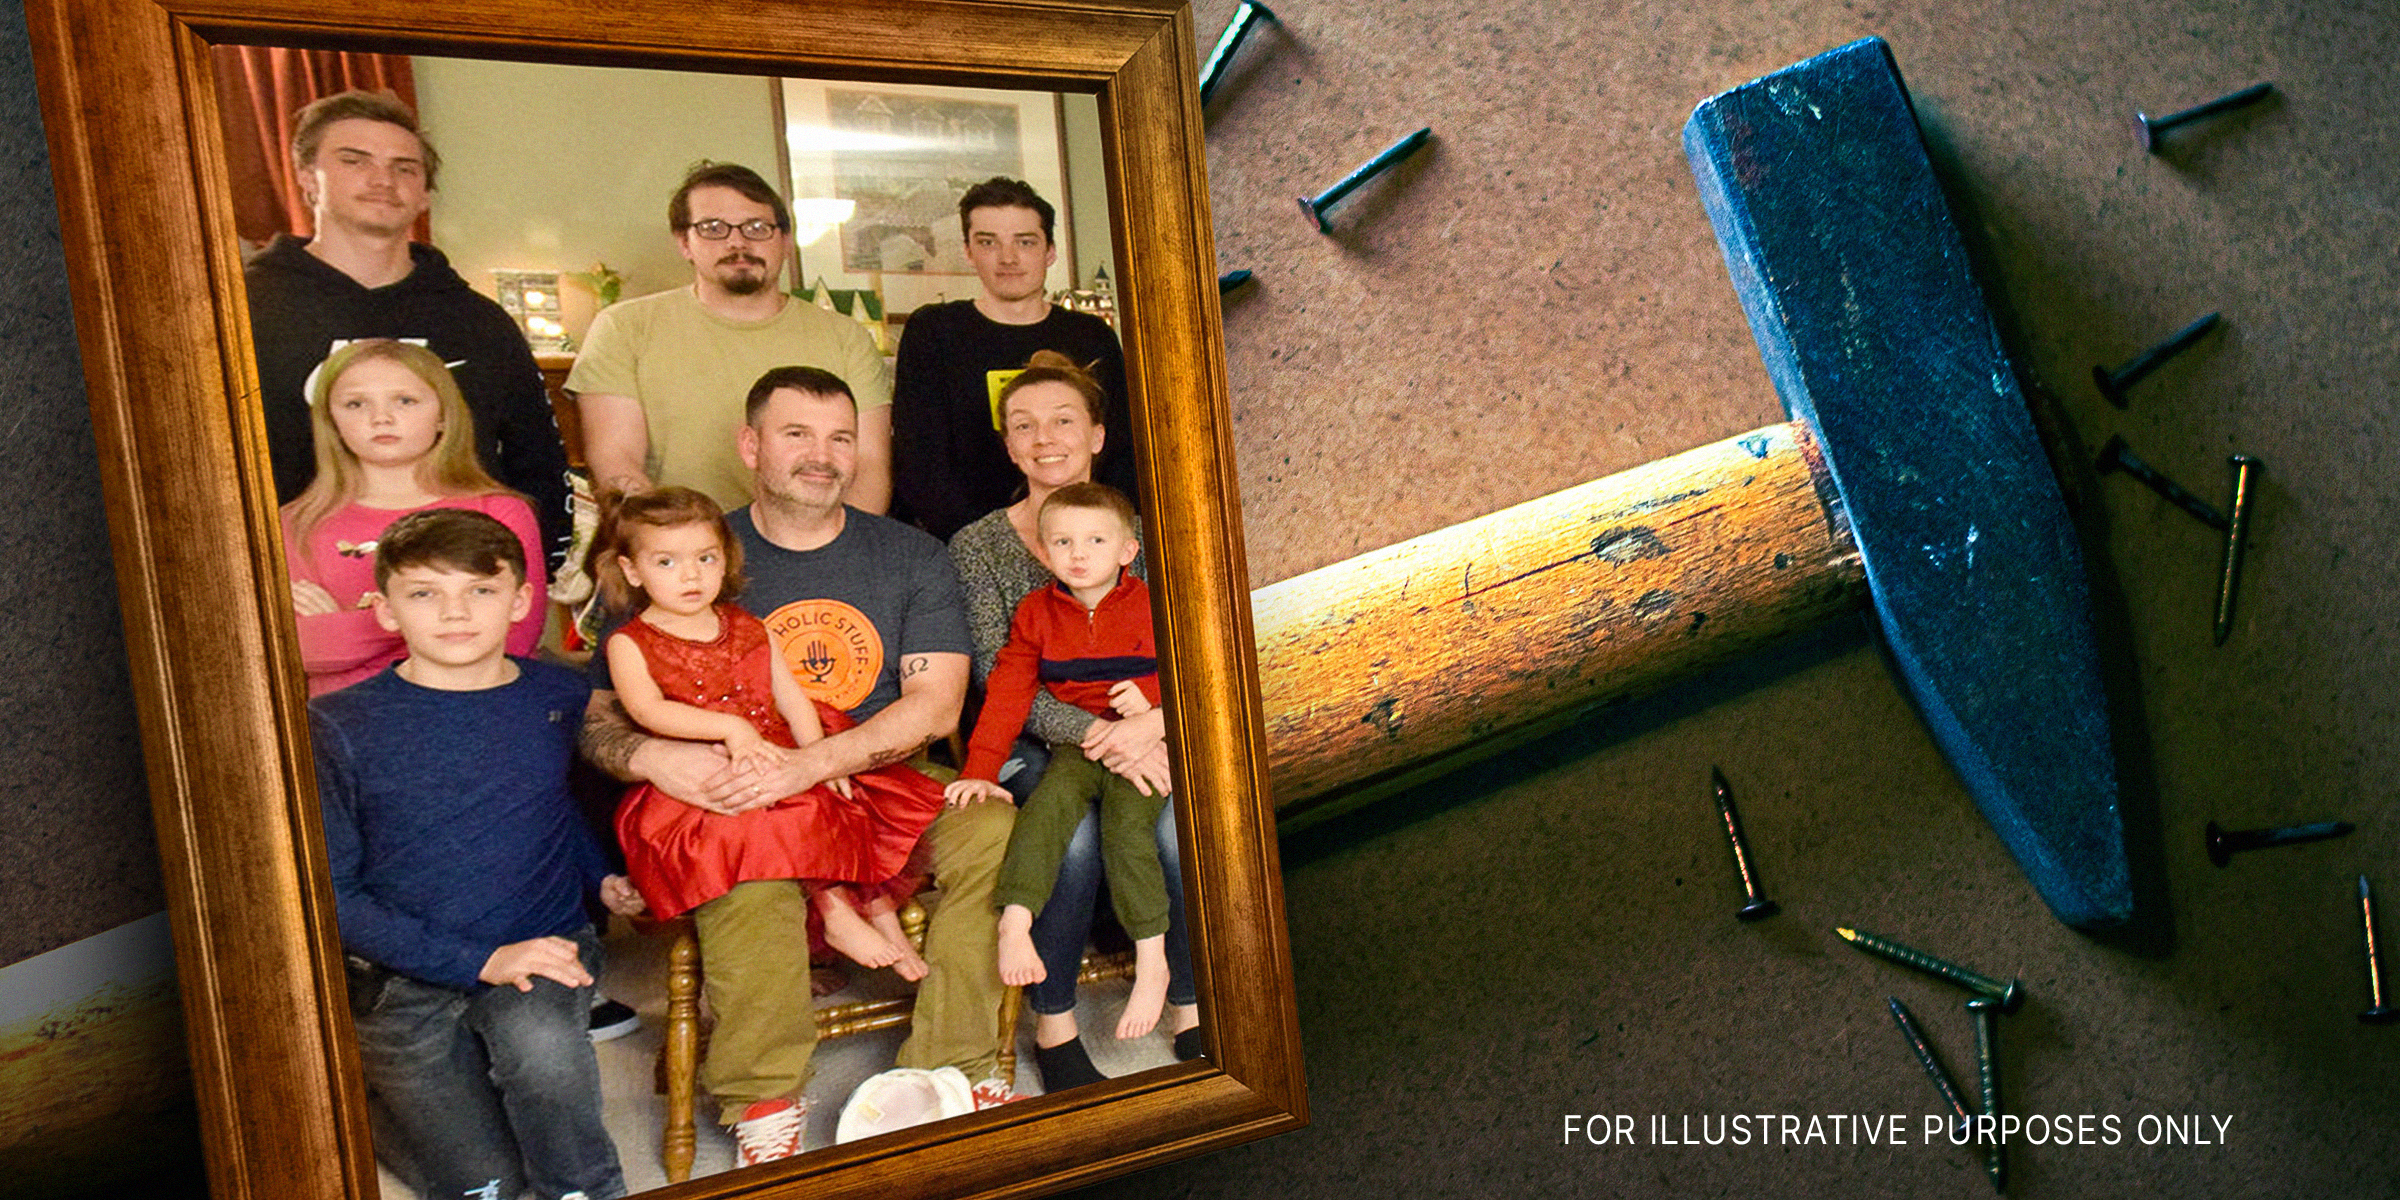 A framed family photograph | Source: Flickr